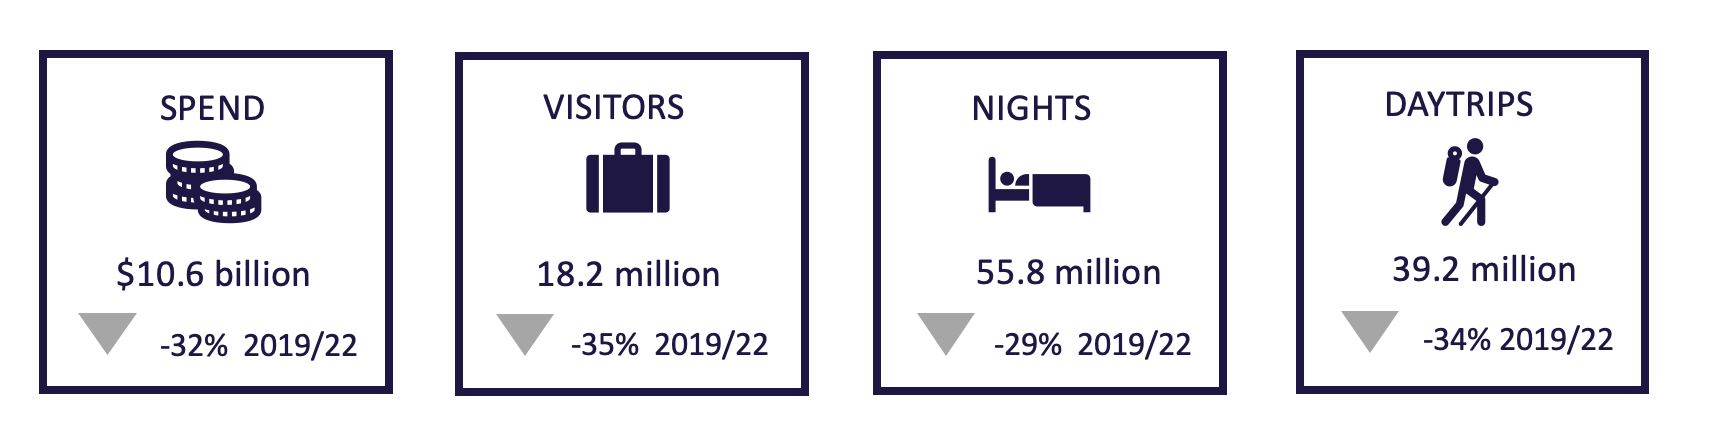 Some top line stats for domestic travel to and within Victoria for the year ending March 2022. Spend $10.6 billion down 32 per cent on the year ending March 2019. Visitors 18.2 million down 35 per cent on the year ending March 2019. Nights 55.8 million down 29 per cent on the year ending March 2019. Day trips 39.2 million down 34 per cent on the year ending March 2019.